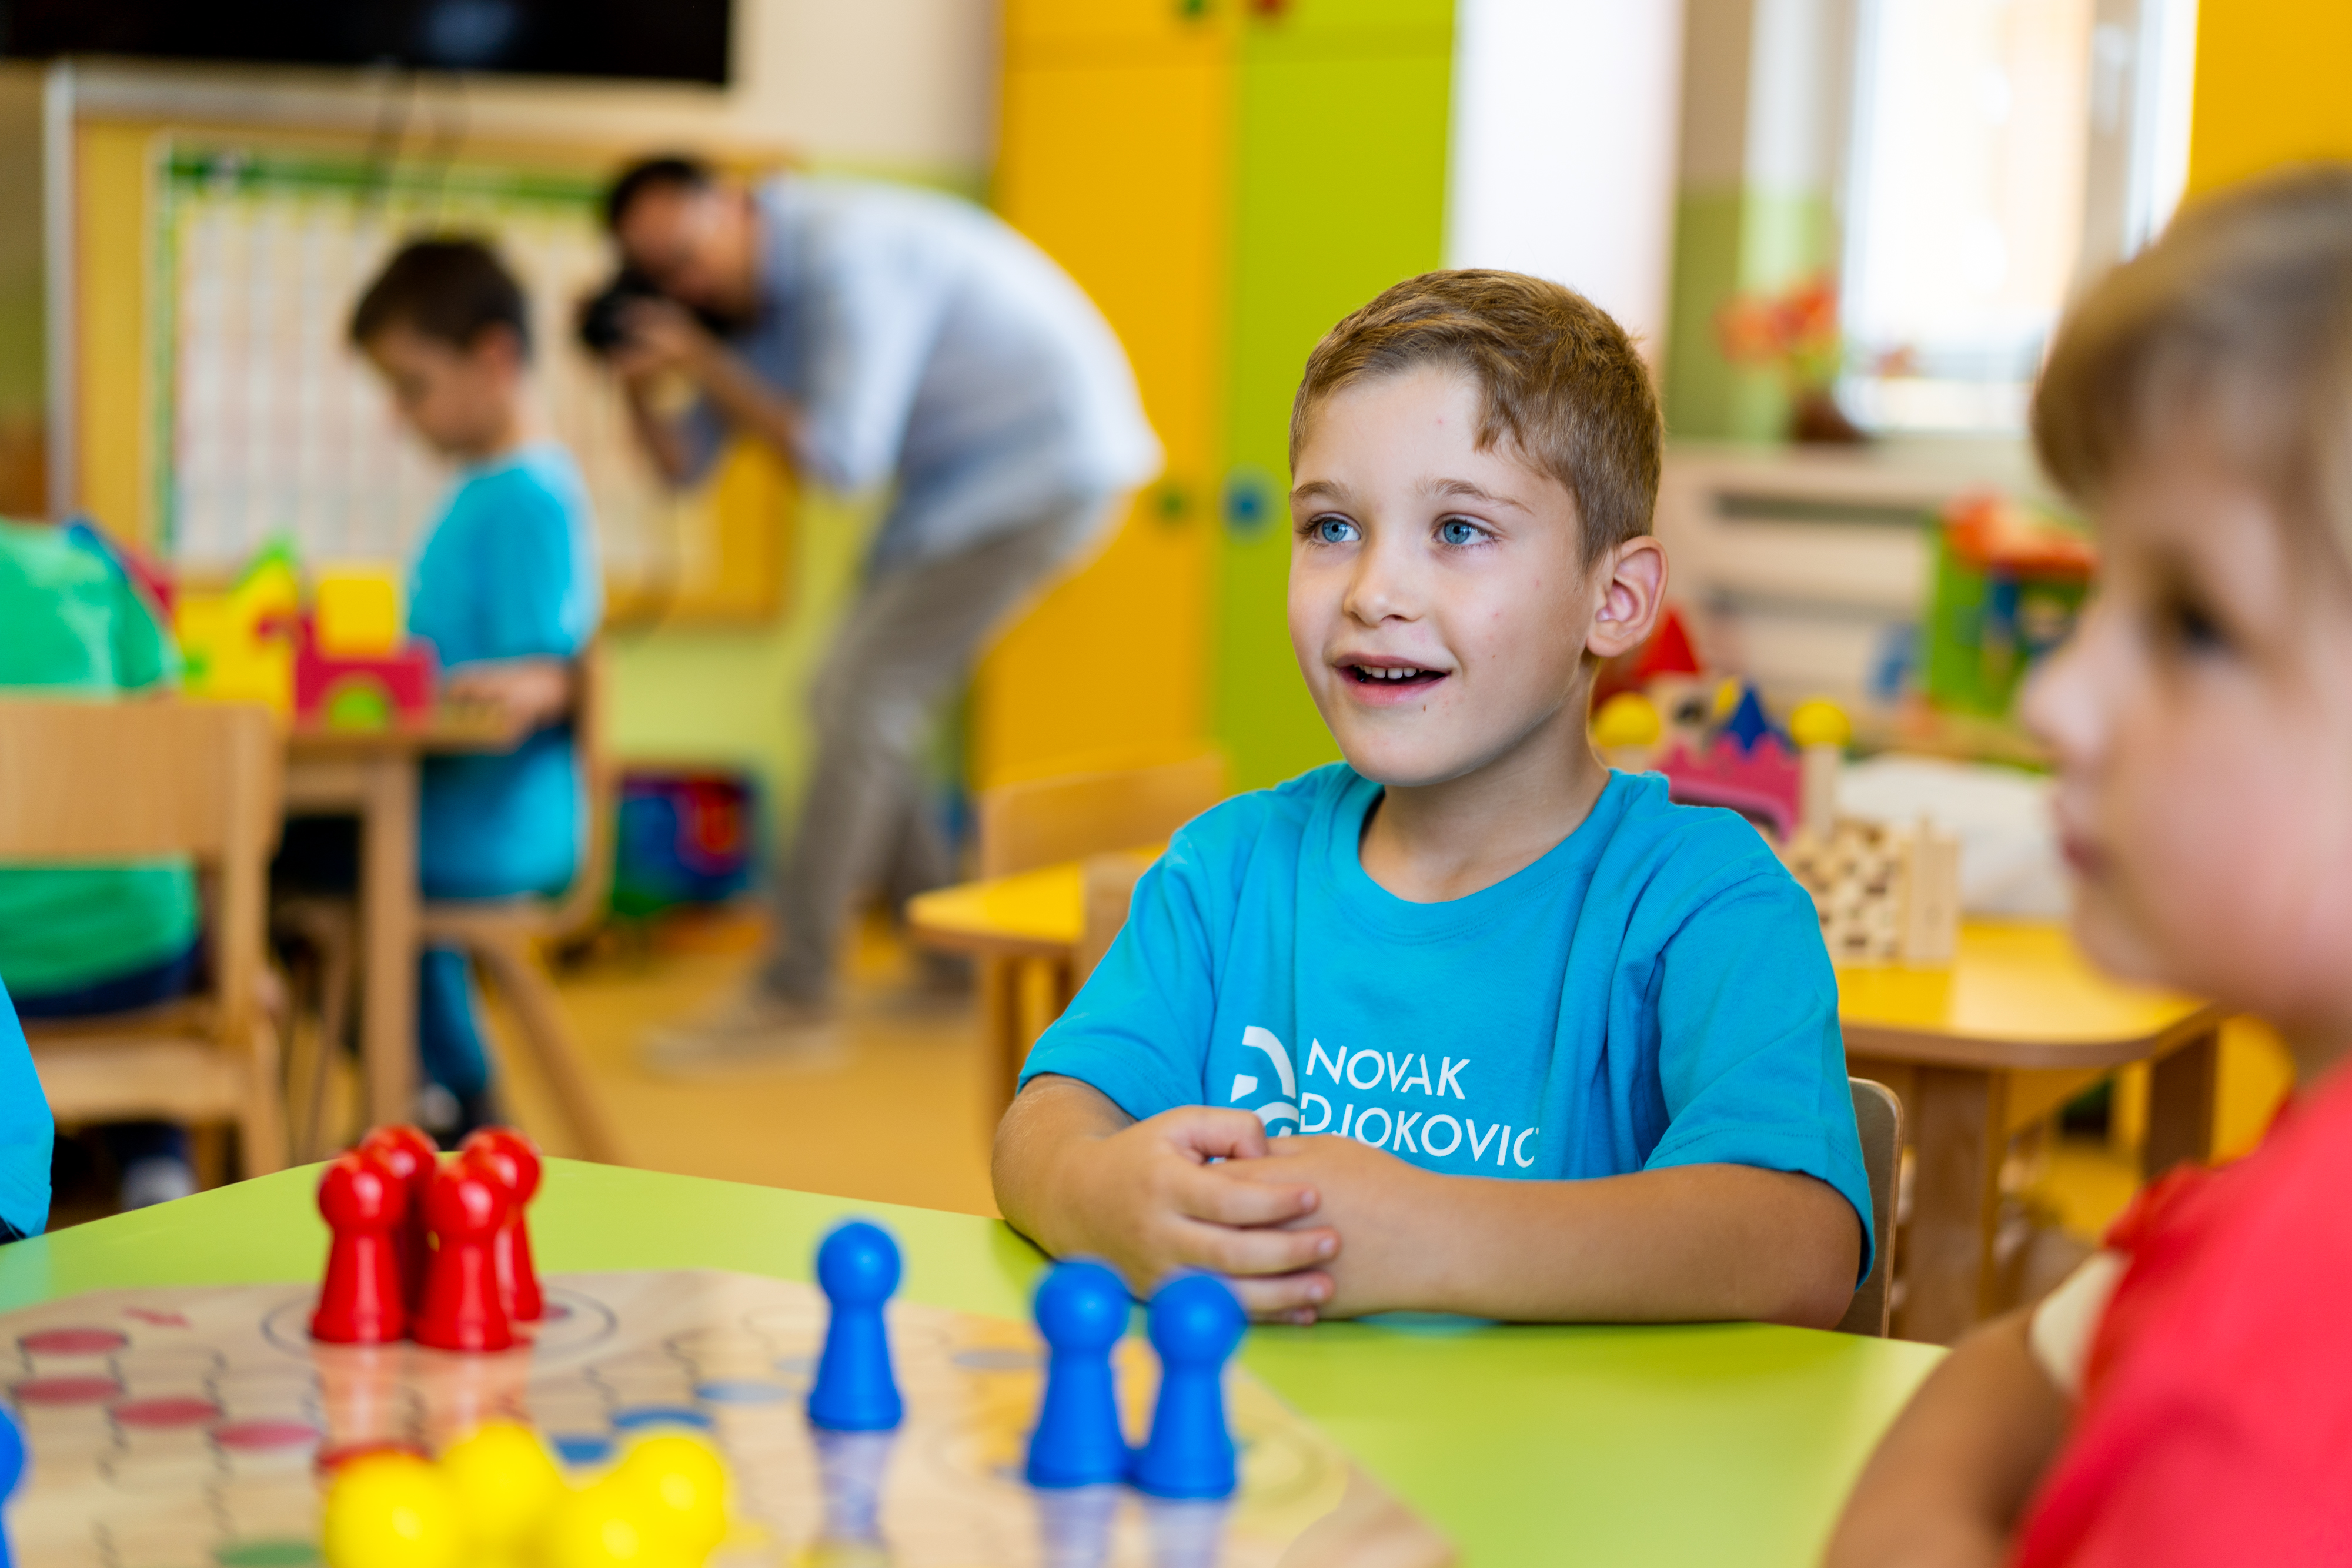 Our focus is not only on the construction and equipment of kindergartens, but we also strive to offer children support in all segments of their development.